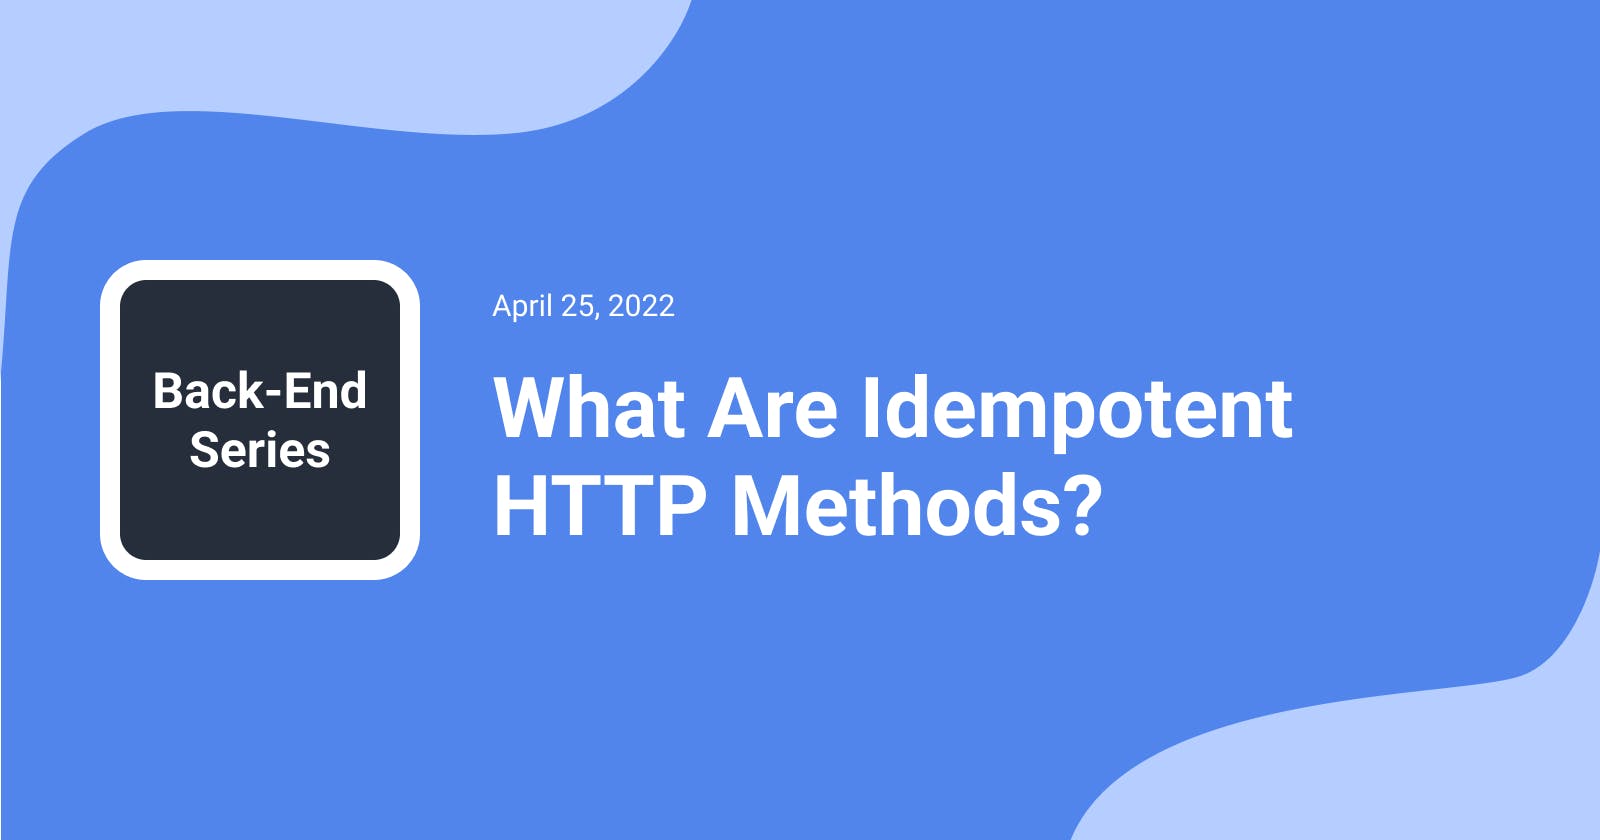 What Are Idempotent HTTP Methods?